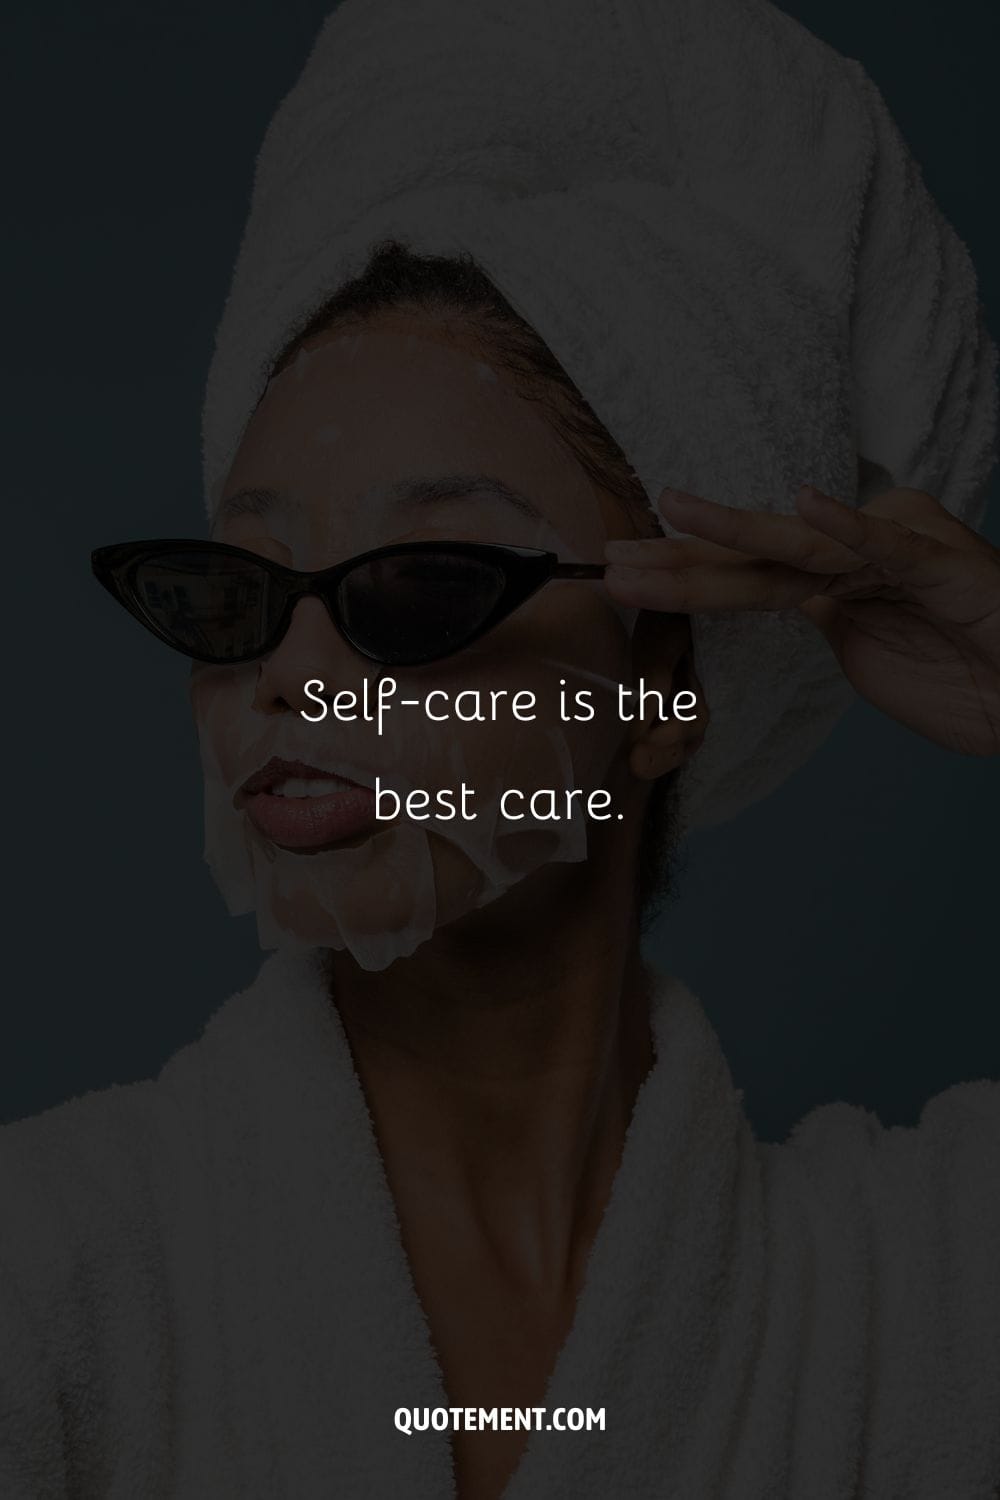 Self-care is the best care.